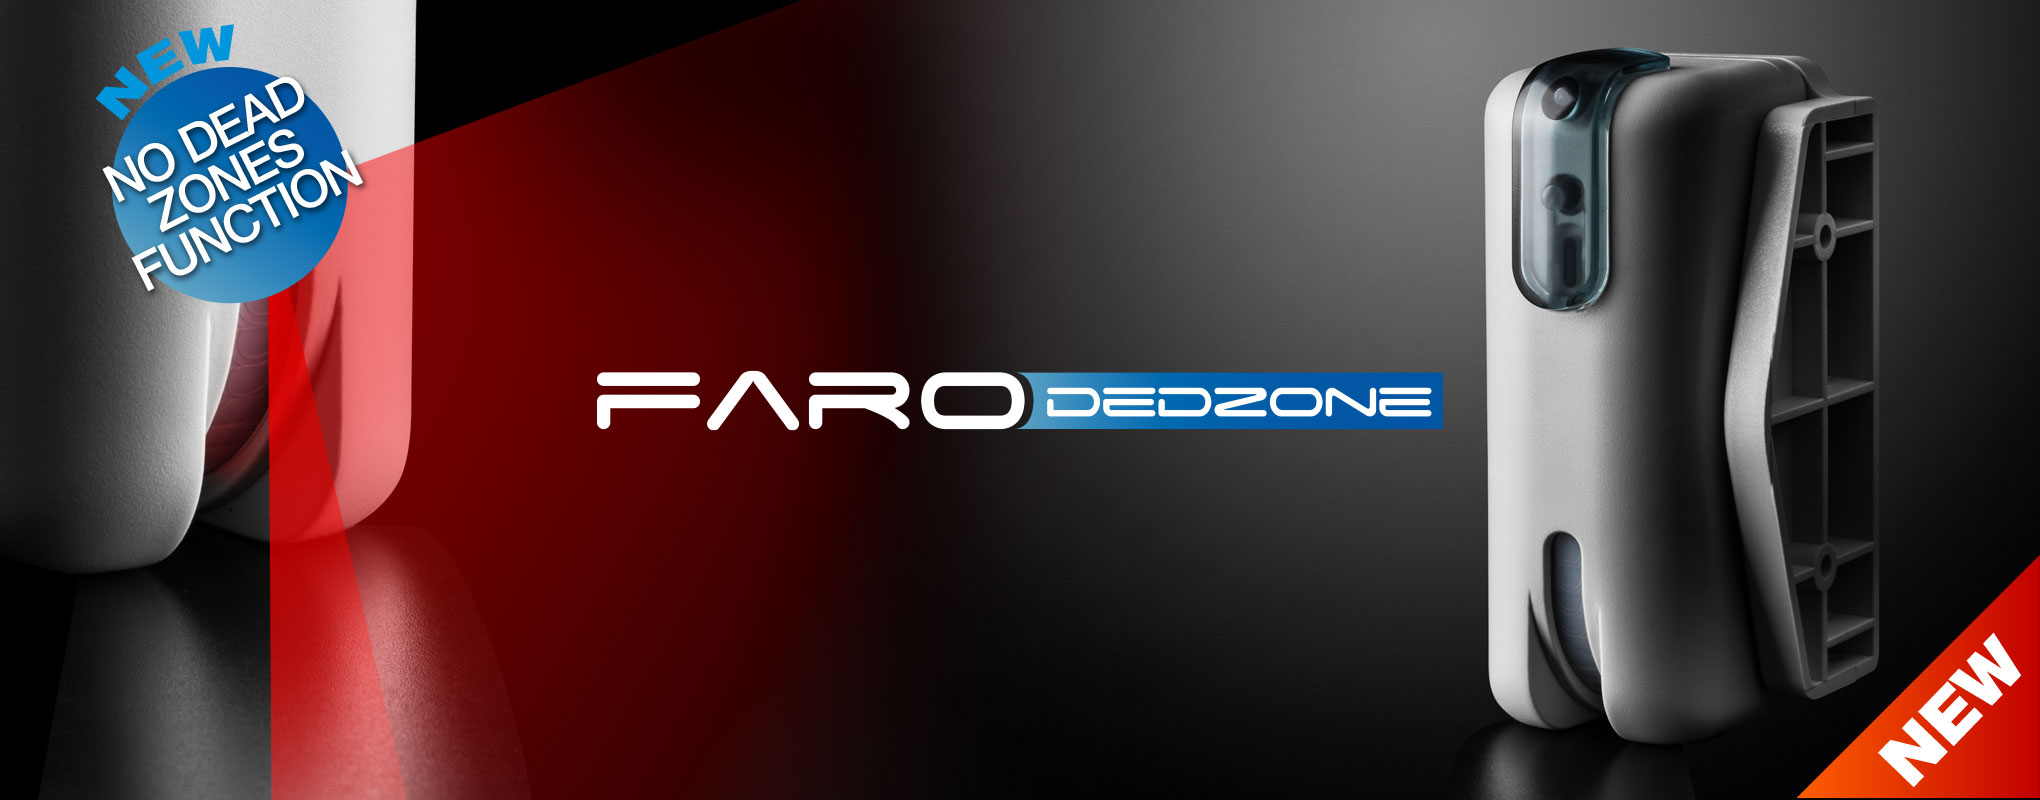 Faro DEDZONE | Curtain detector for outdoors, double technology